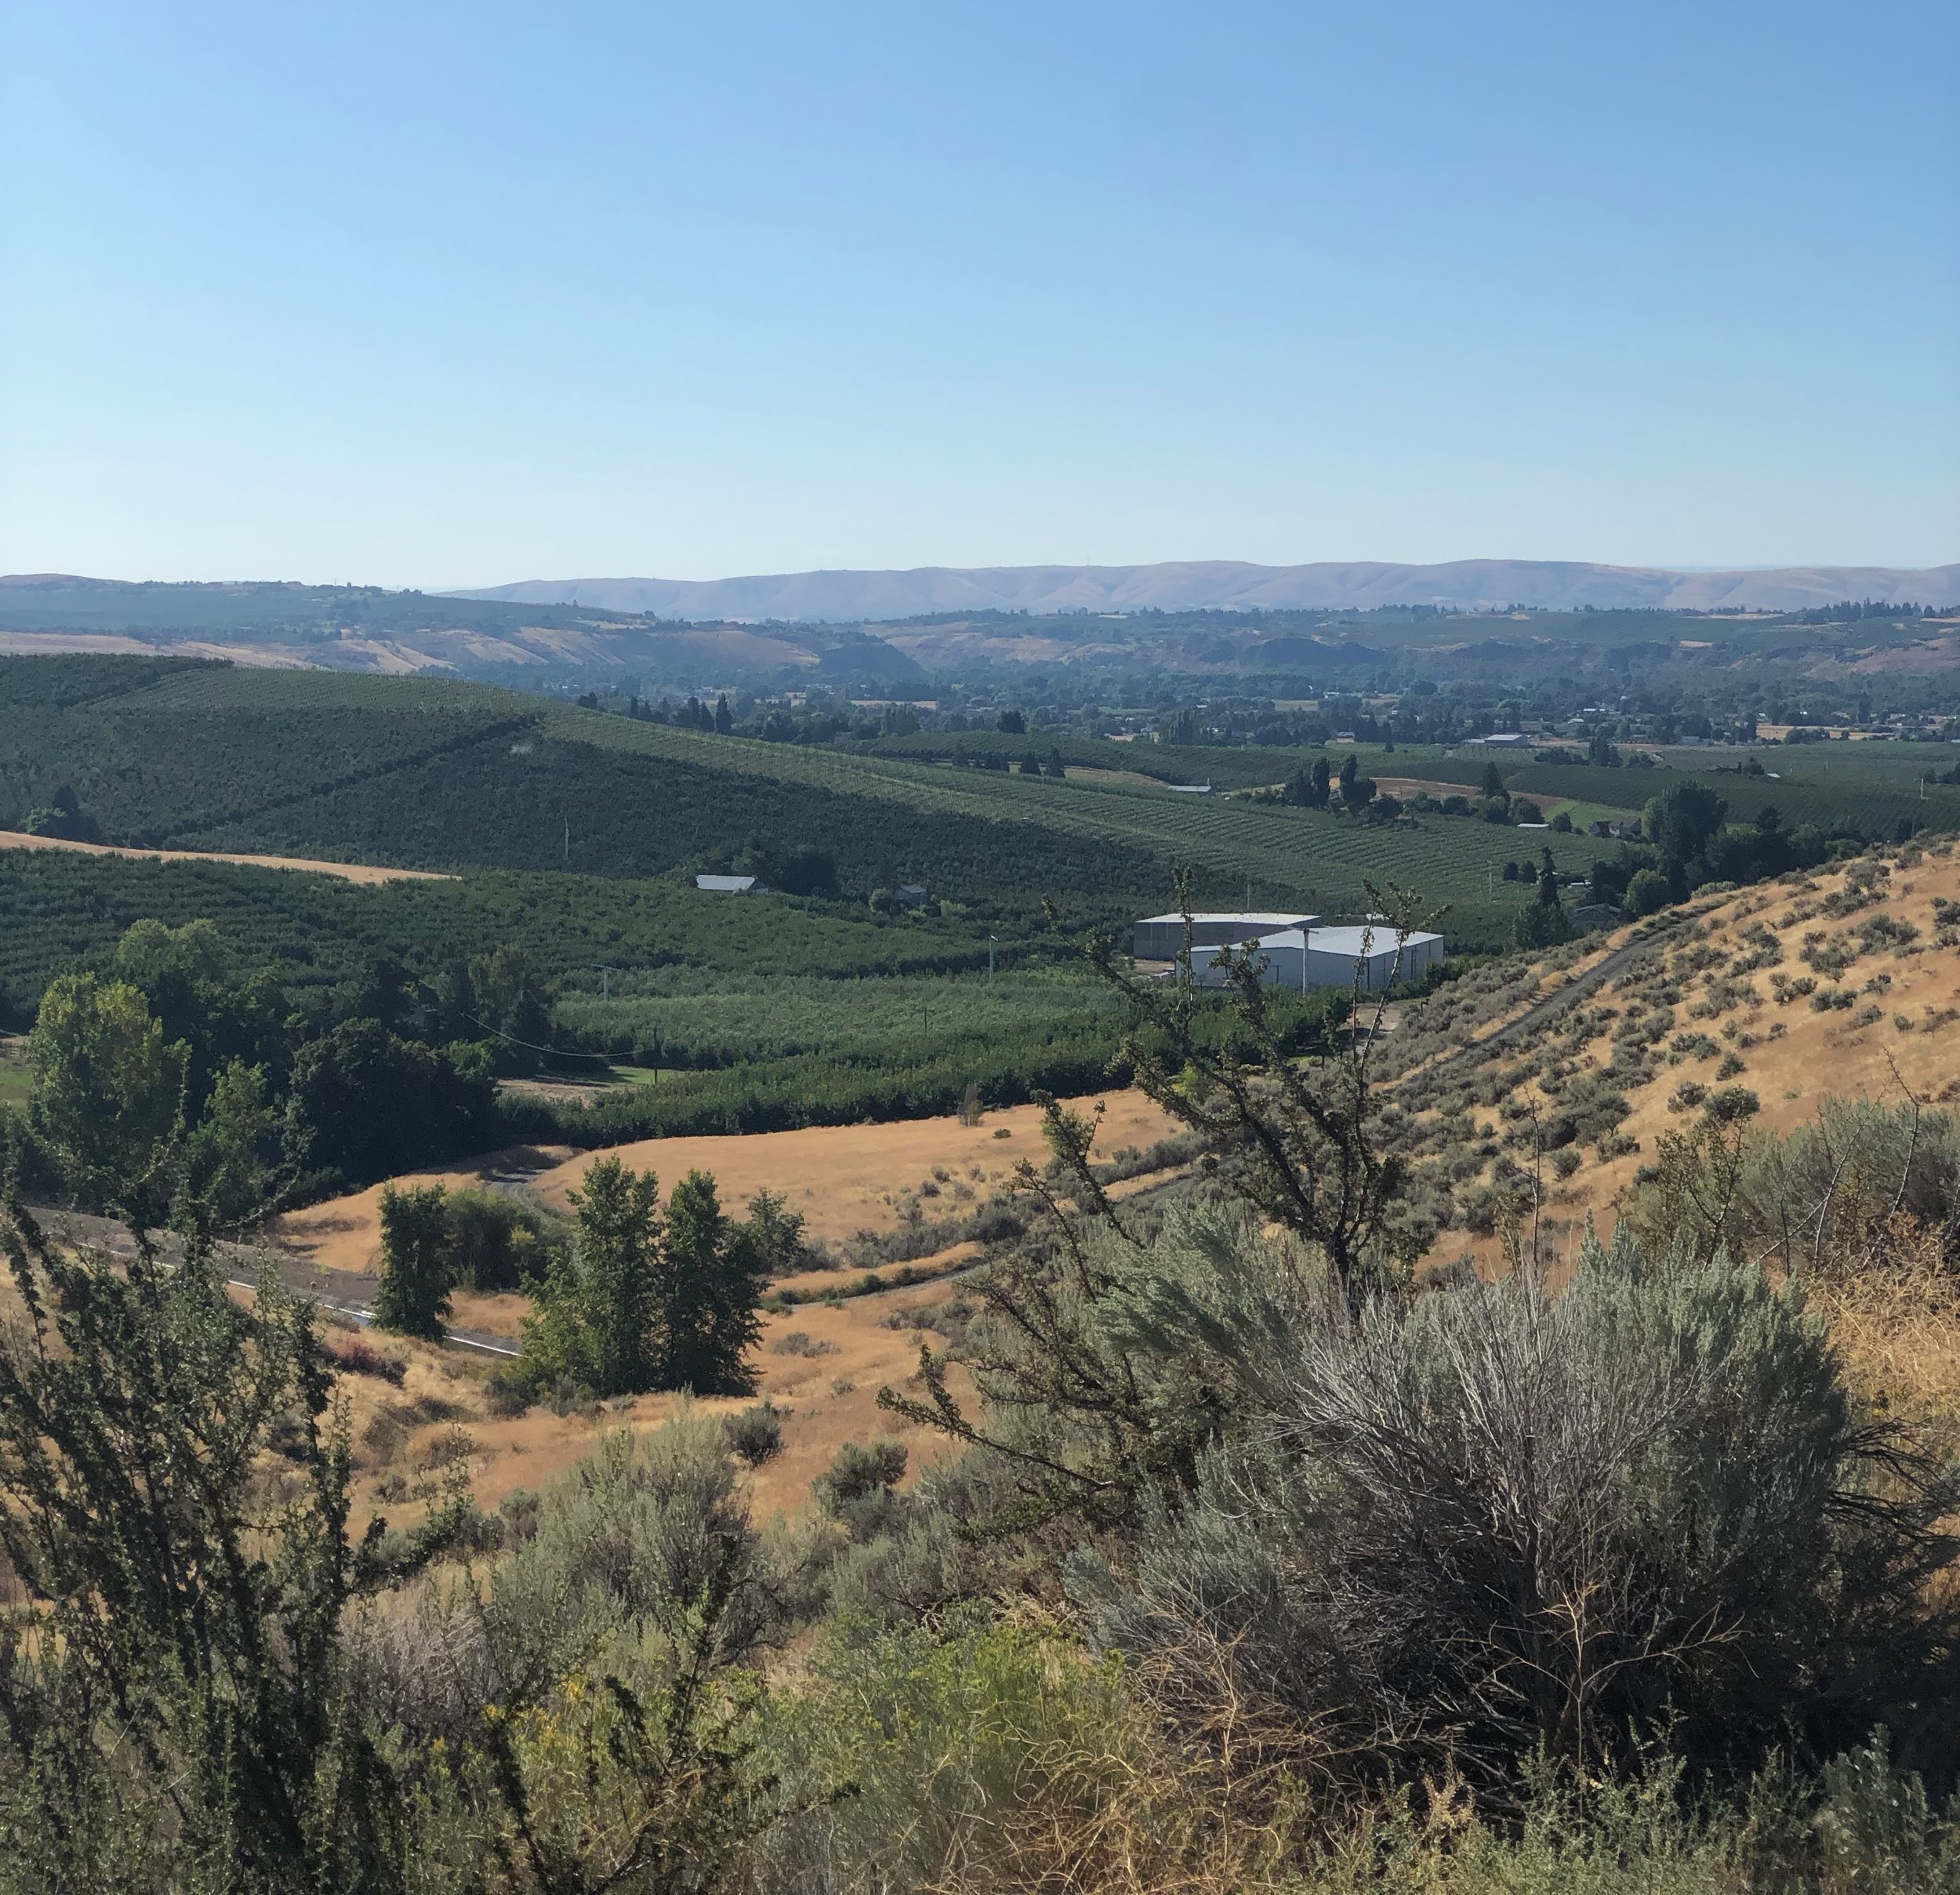  The vistas on a late summer day in the Naches Valley are breathtaking! It was so peaceful and friendly. 